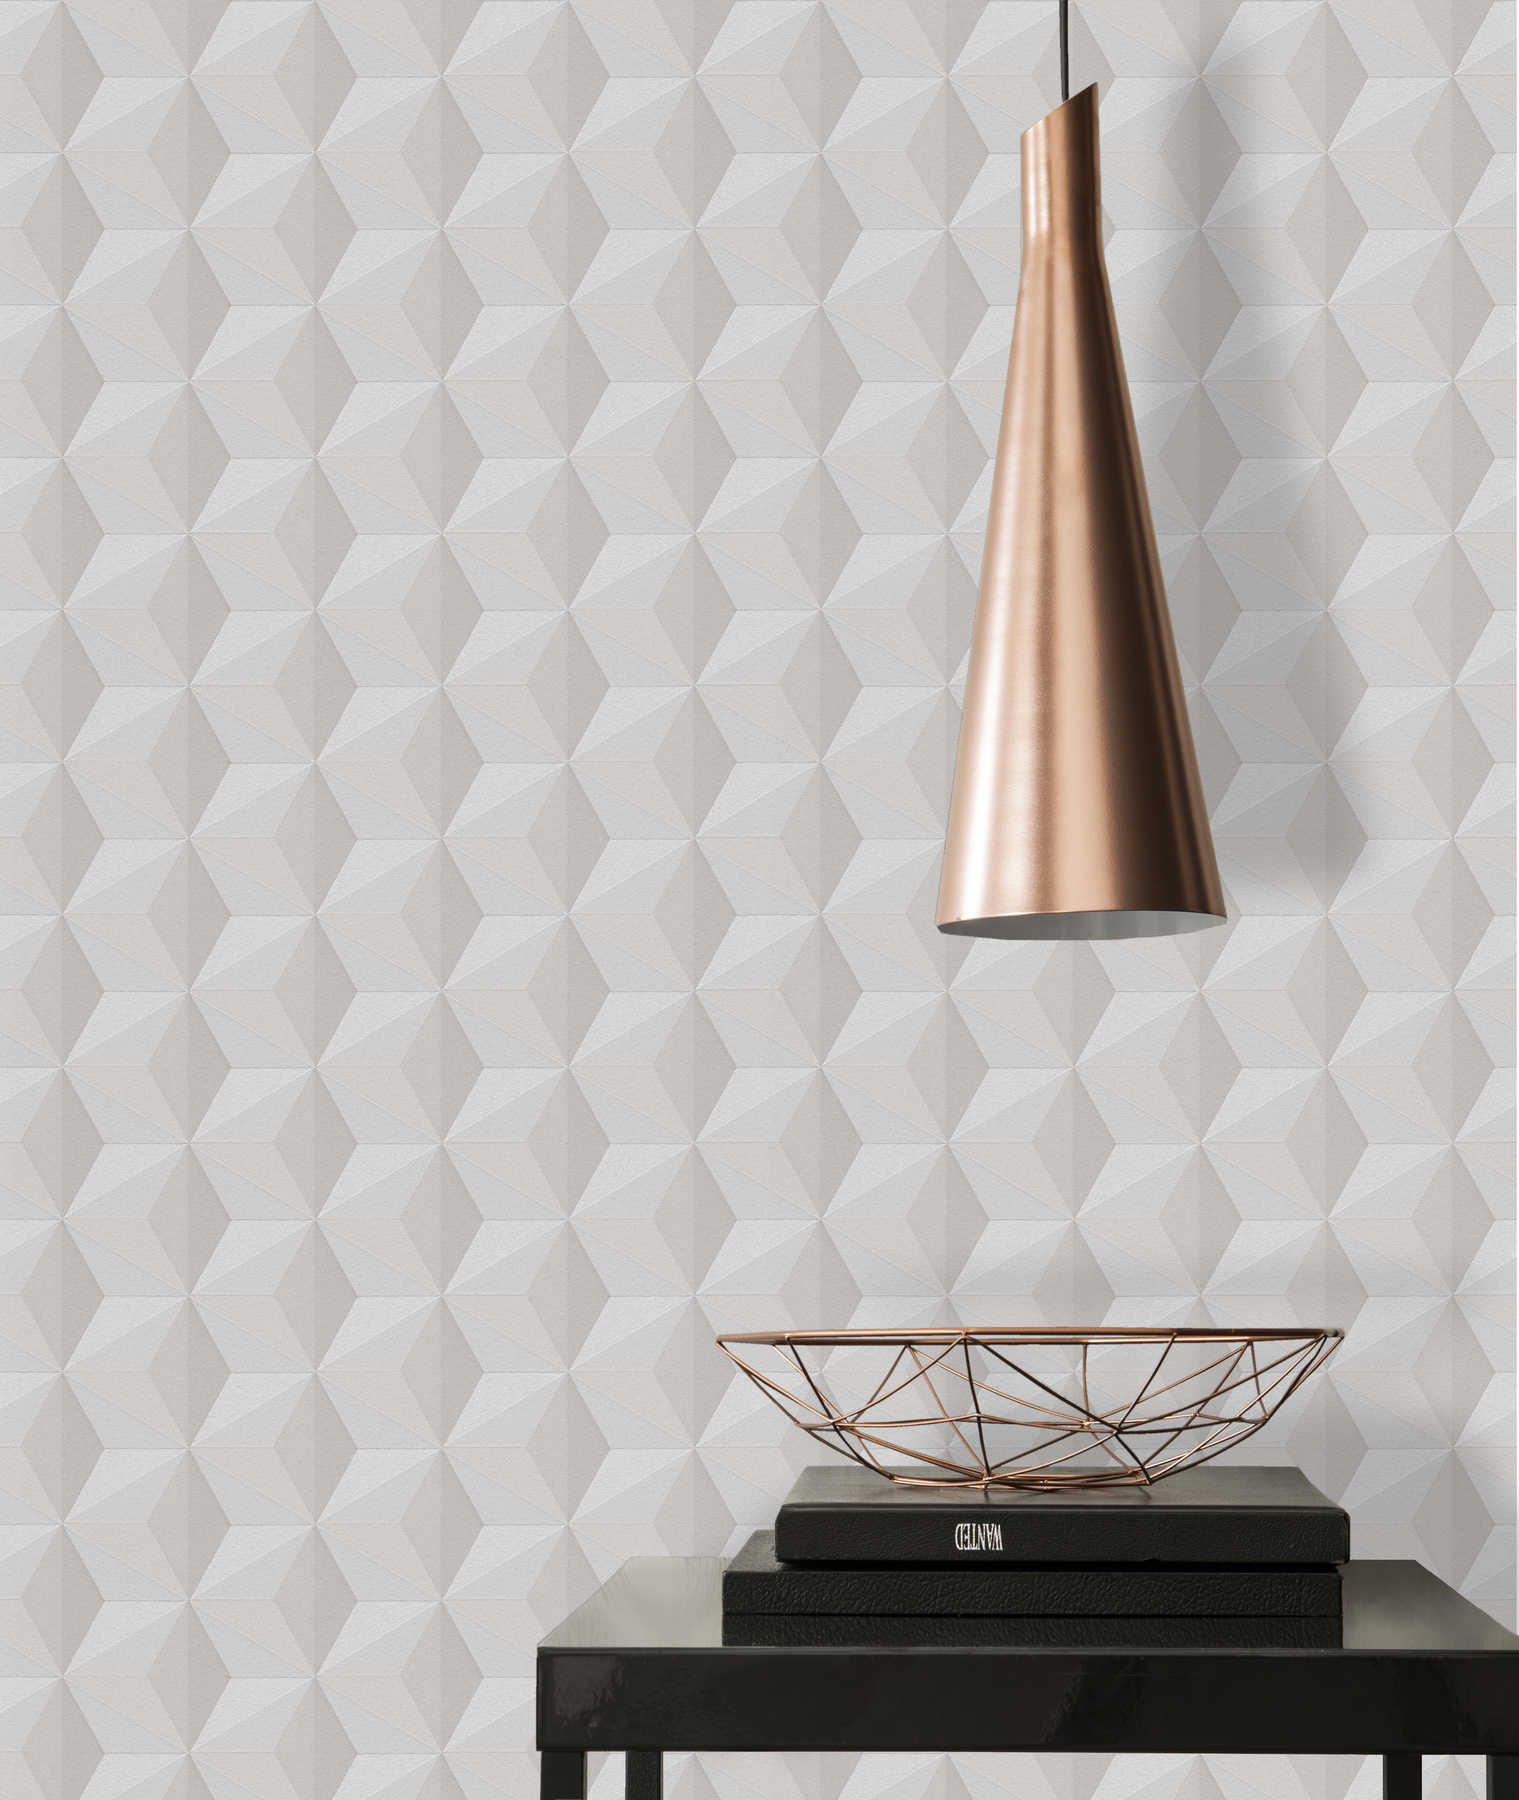             Pattern wallpaper with graphic design & 3D effect - beige
        